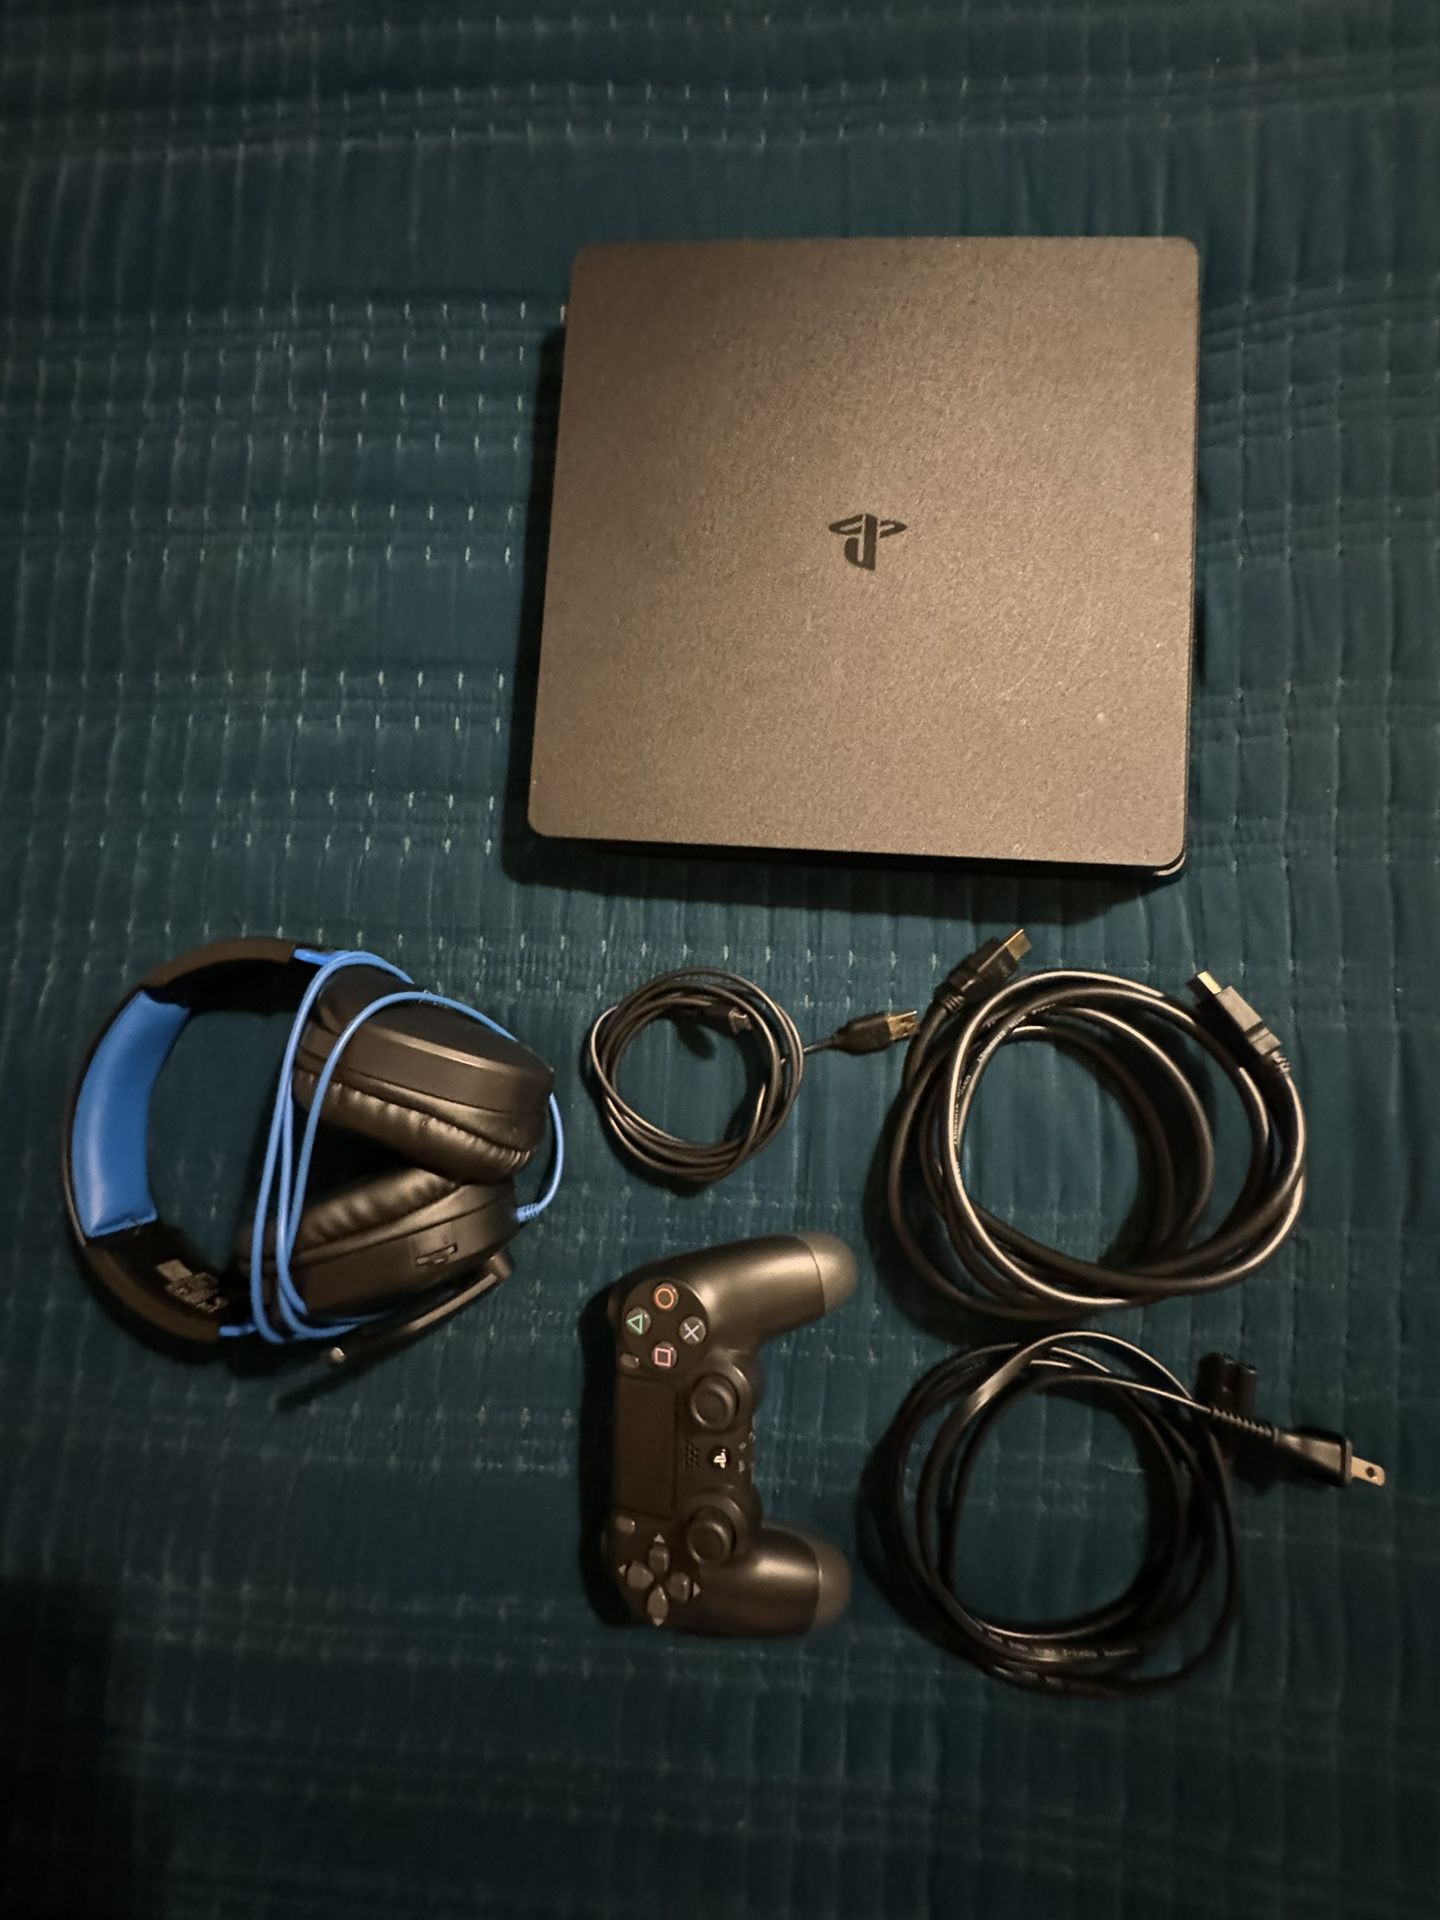 PS4 Slim 500gb. Comes with controller, and Turtle beach headset.